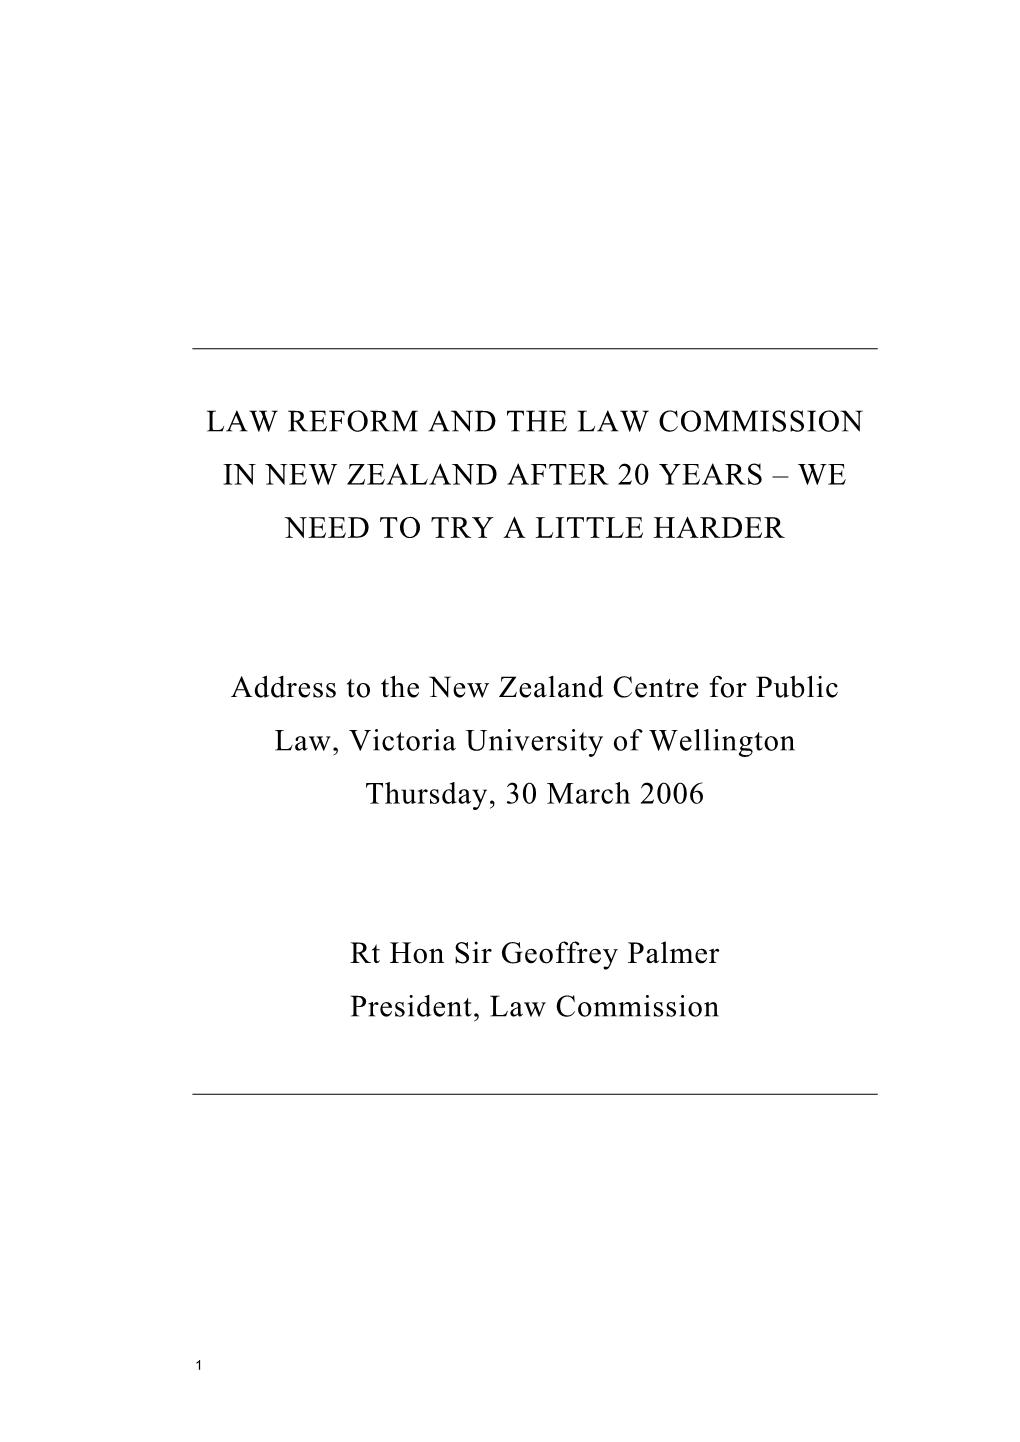 Law Reform and the Law Commission in New Zealand After 20 Years – We Need to Try a Little Harder